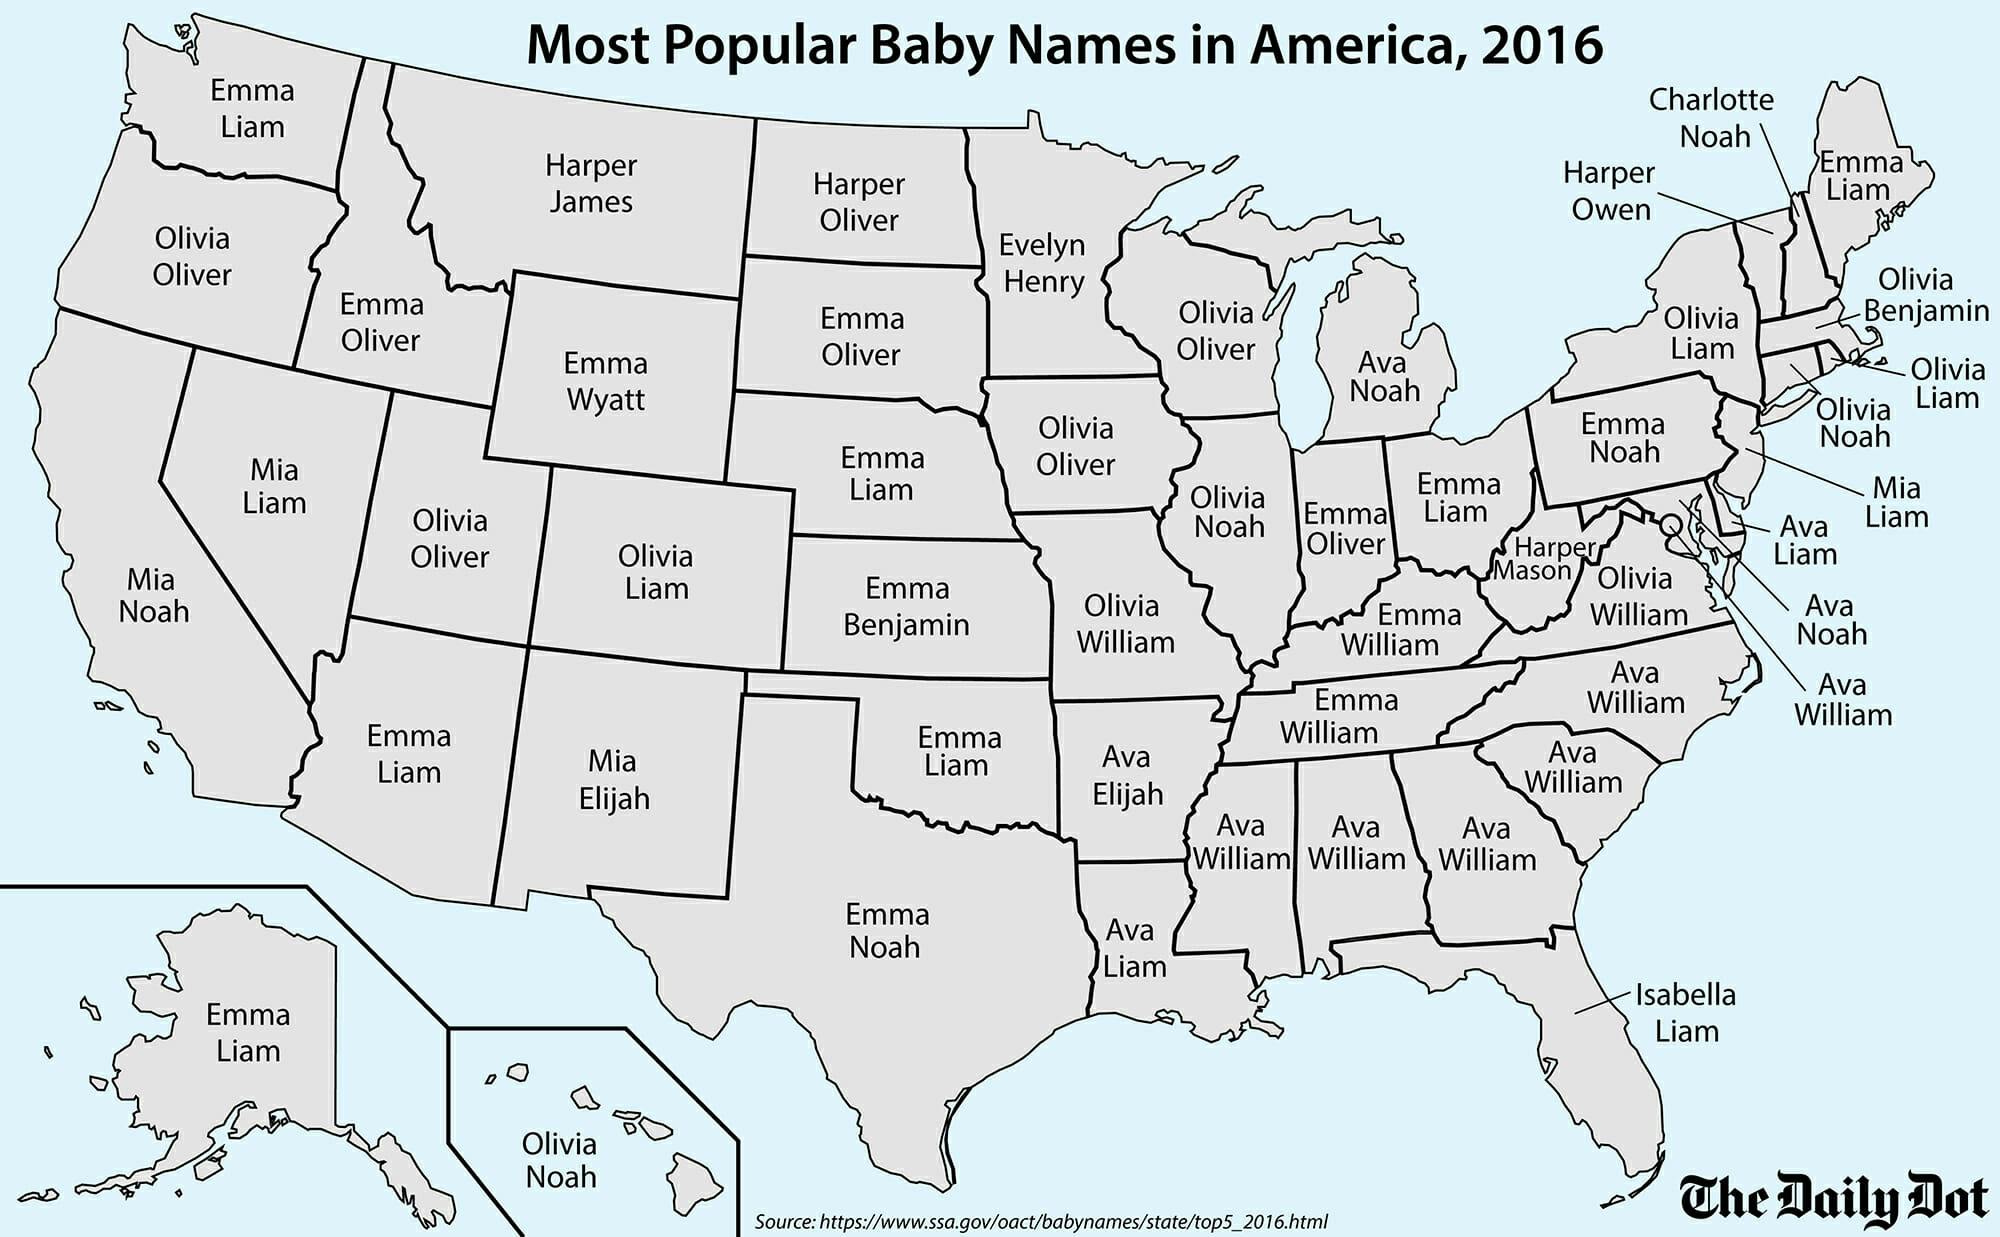 Most Popular Baby Names in America, 2016